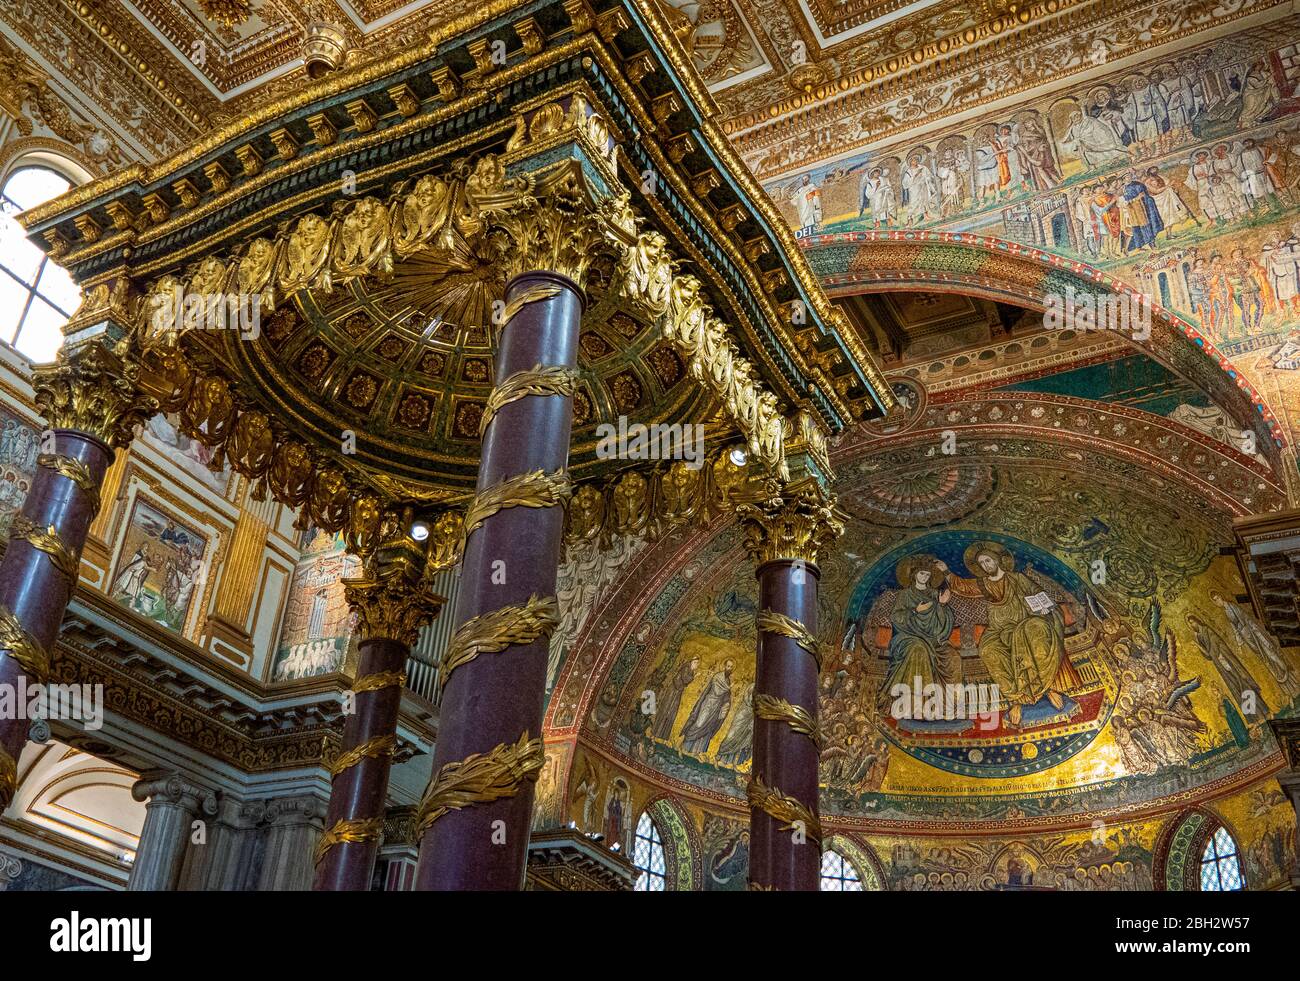 Rome, Italy - July 20, 2018: The canopyt over the main altar,  with the Coronation mosaic in the background, of he Santa Maria Maggiore Basilica Stock Photo